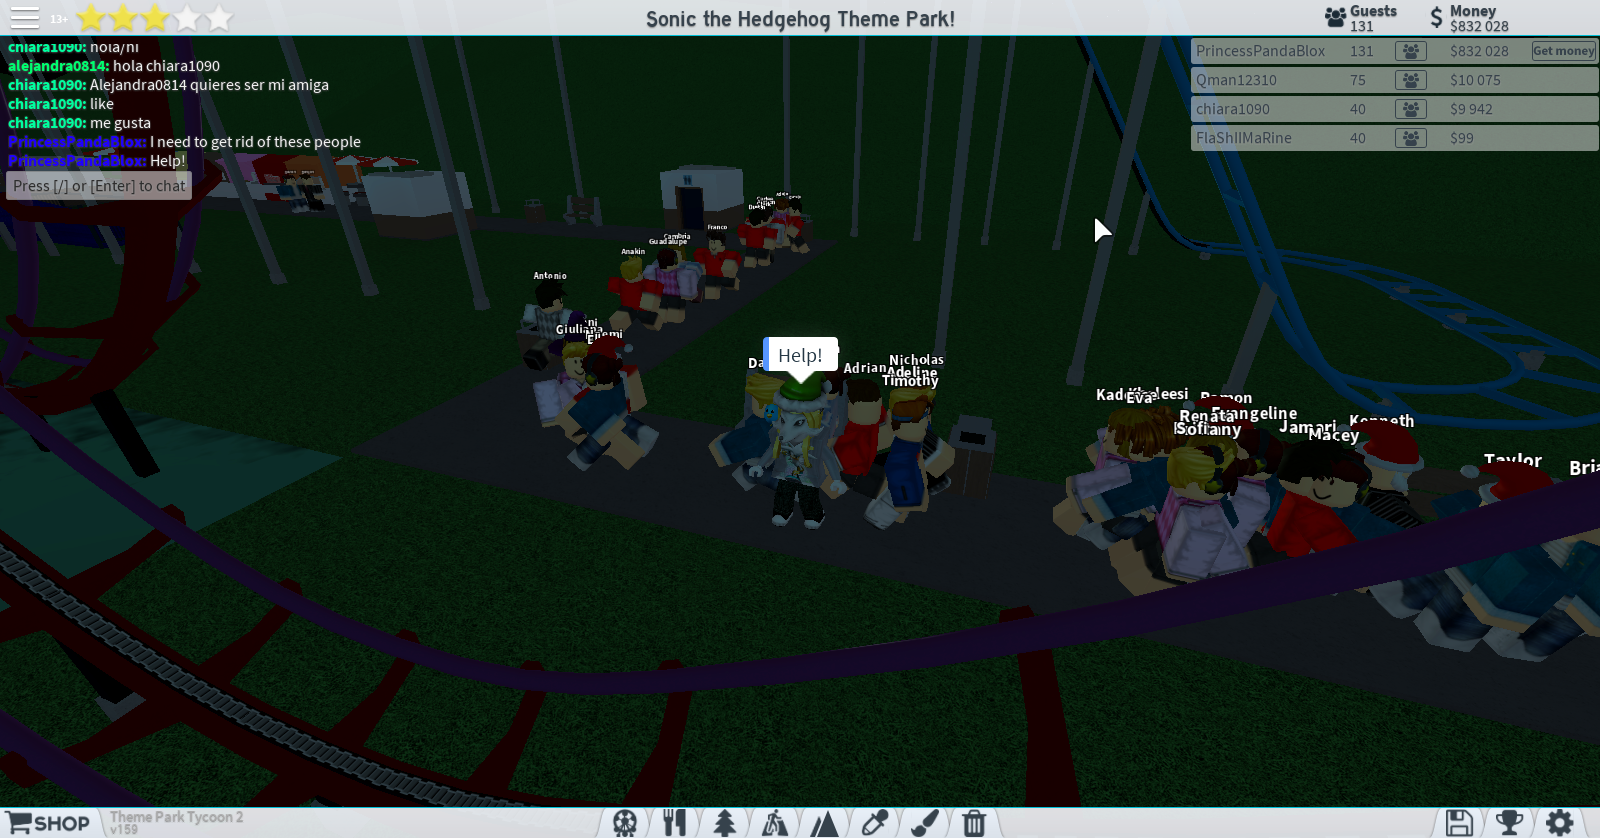 How Do I Get Rid Of These People Fandom - remove ride theme park tycoon roblox